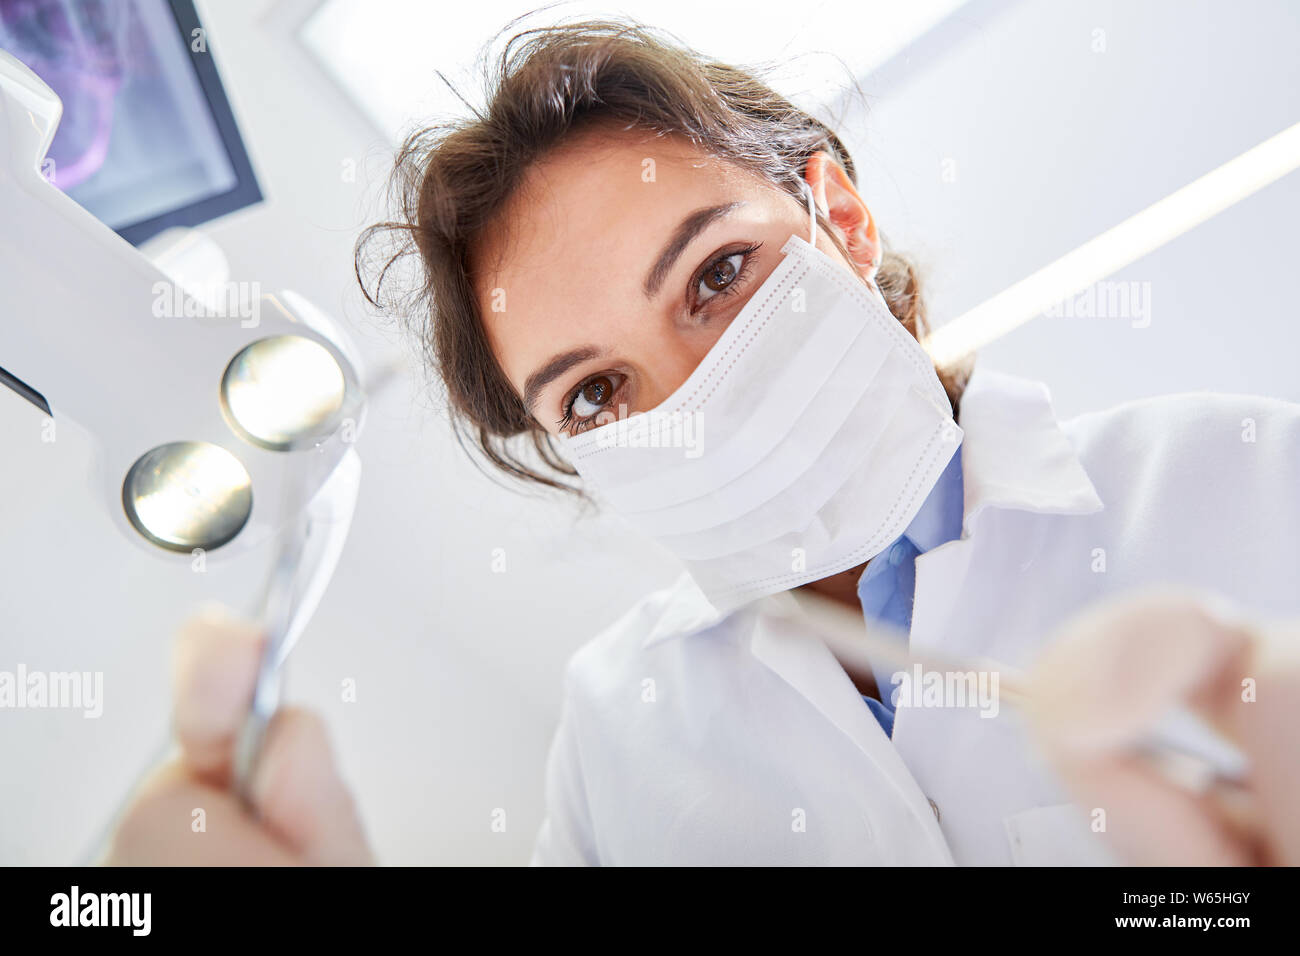 Young woman wearing surgical mask as a dentist or dental assistant in training Stock Photo